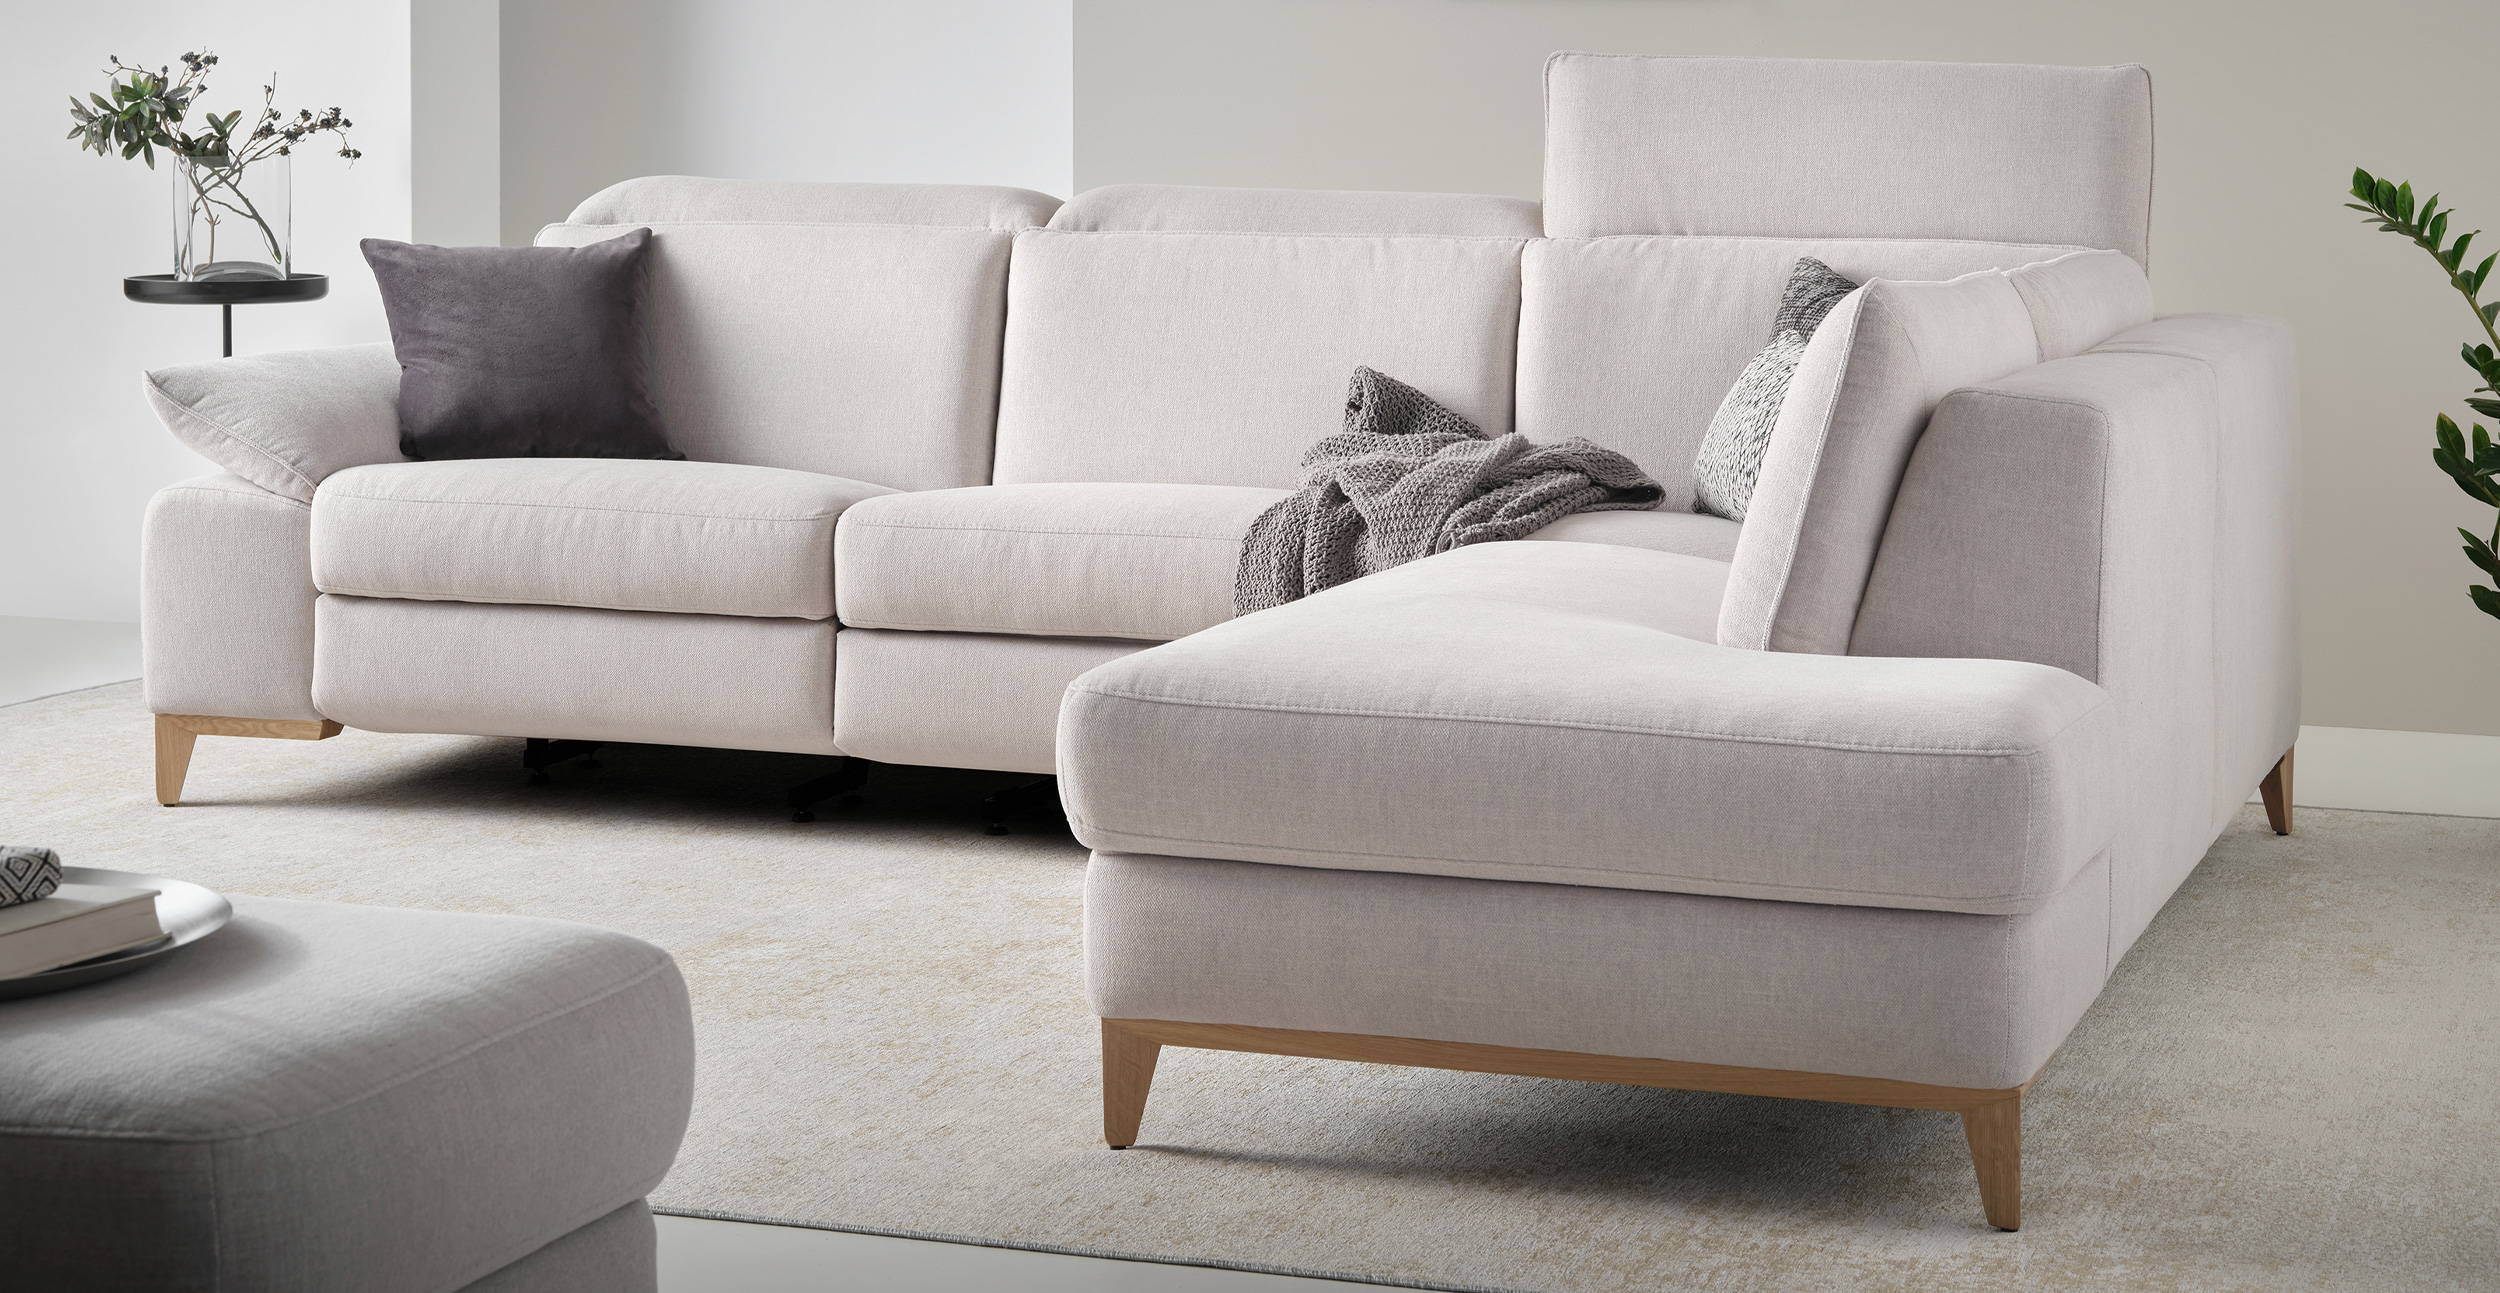 Where Can I Buy A Rom Sofa? BF Home In Norwich, That's Where!